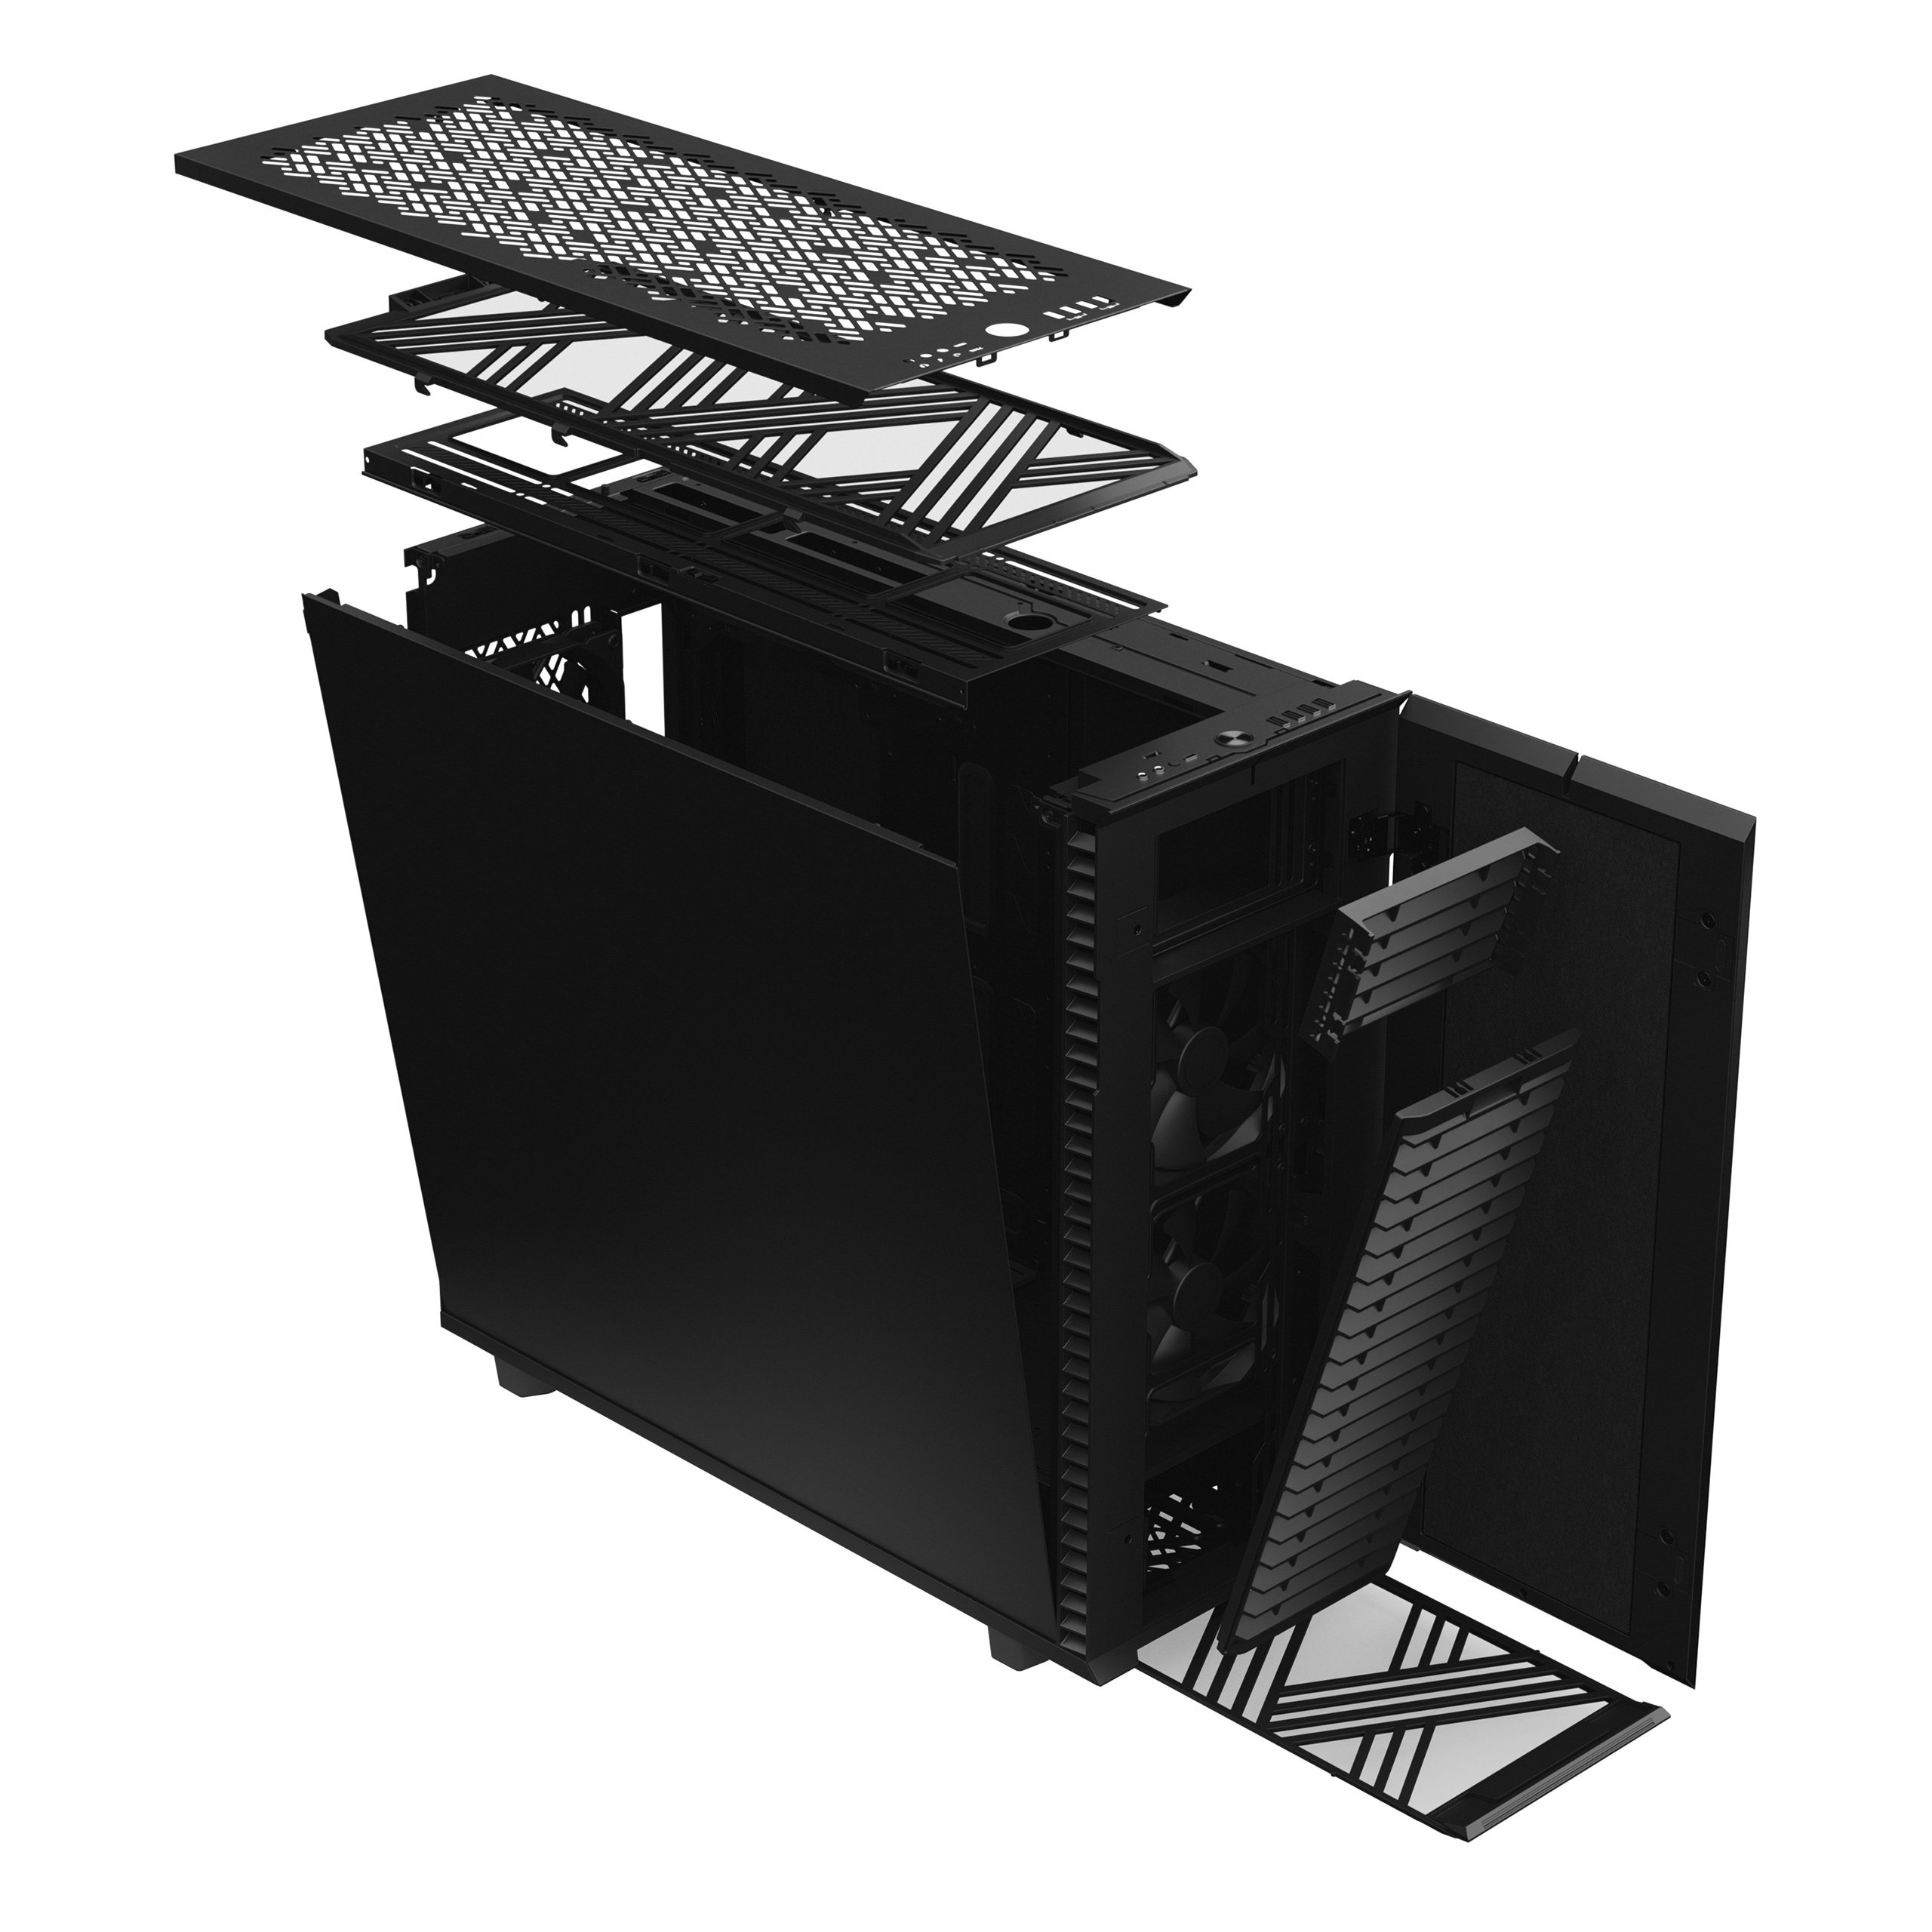 Cooling the GPU through Vents in the Pc Case - Fractal Design Define 7 XL